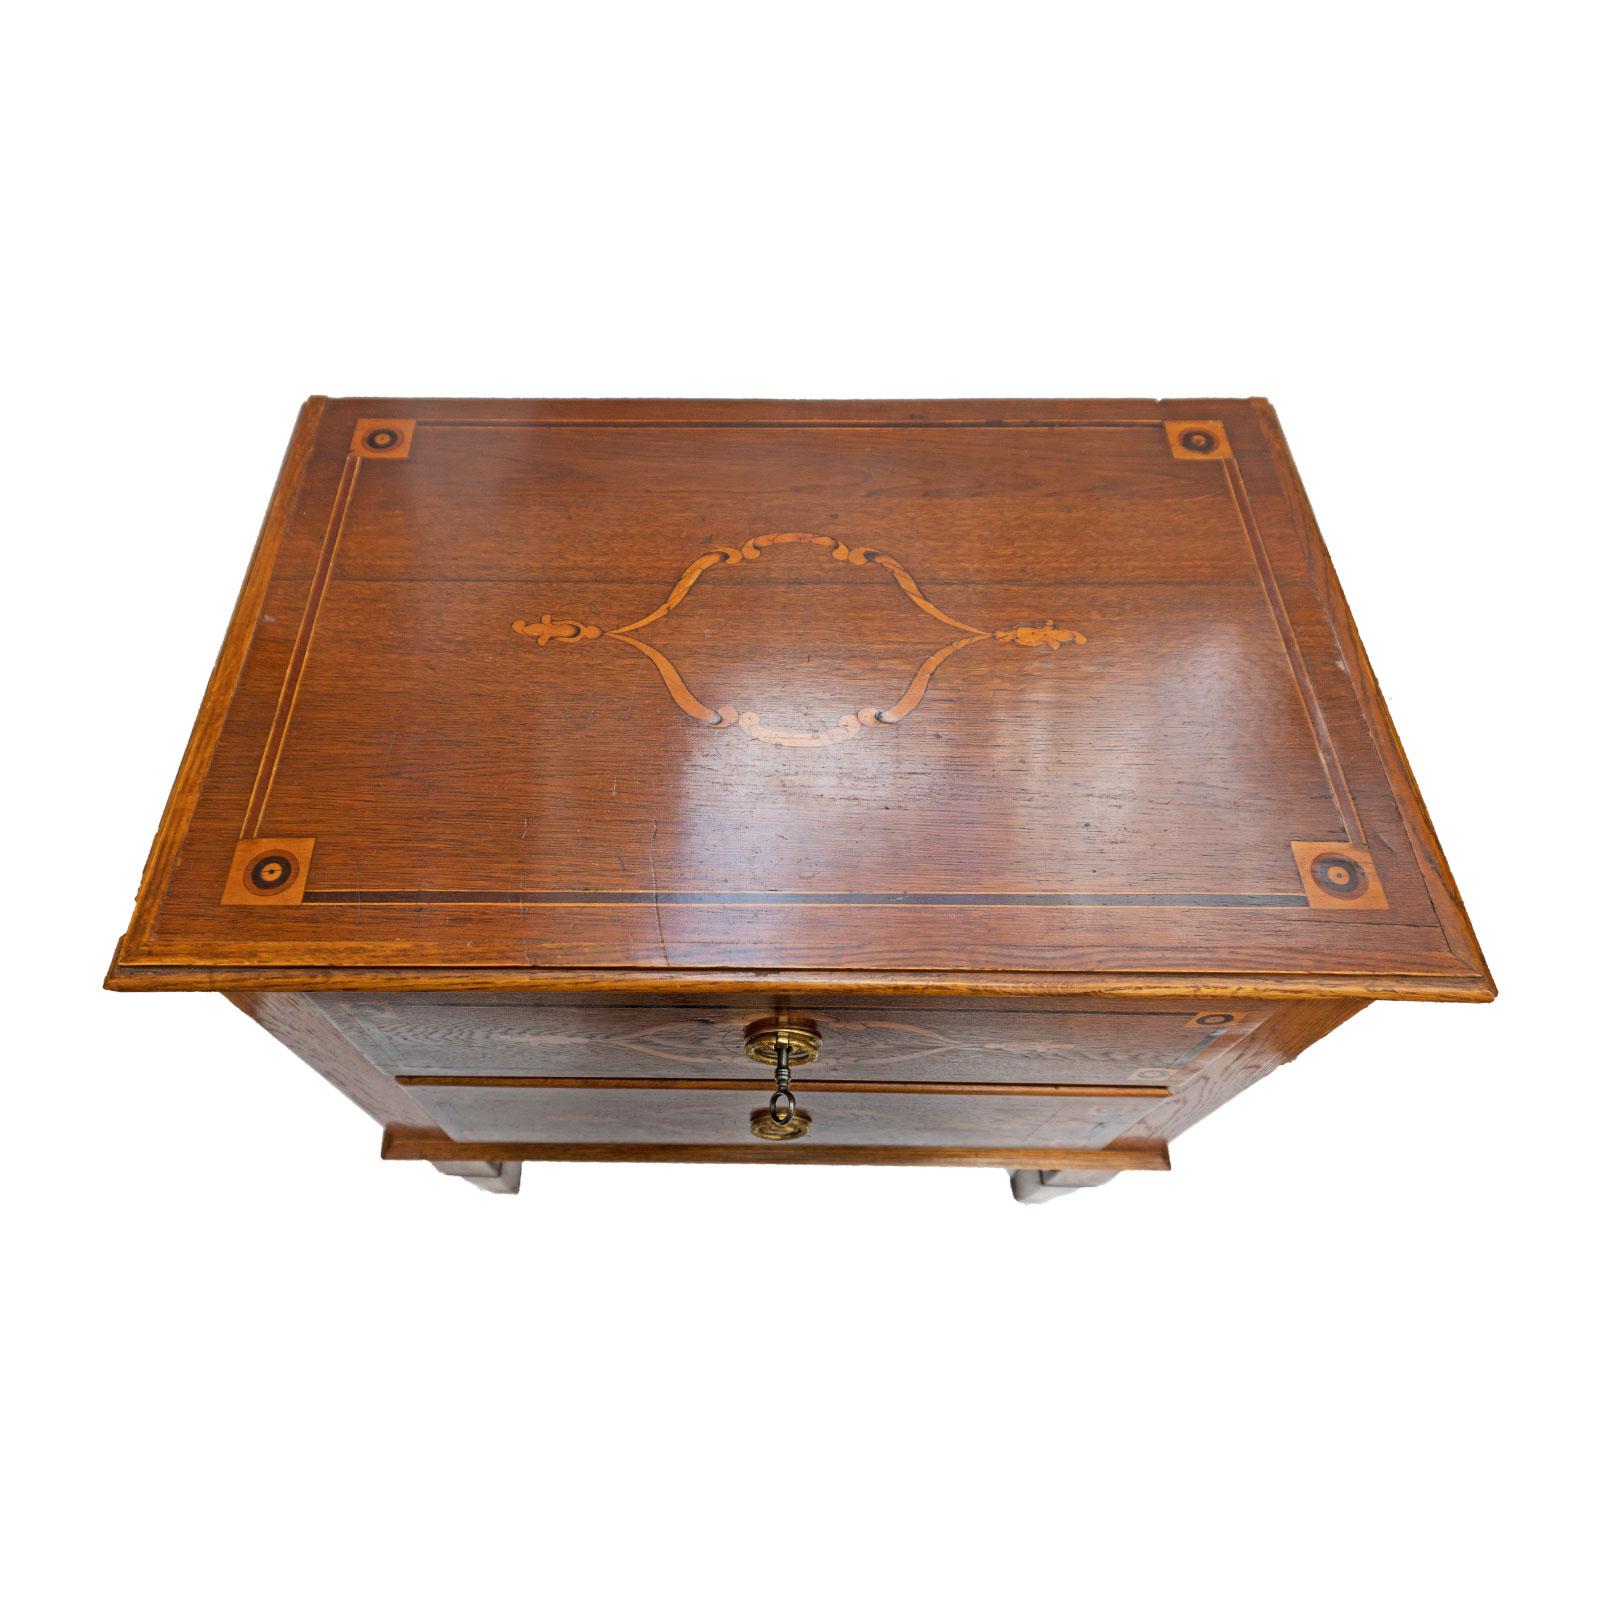 Louis Seize chest of drawers oak France circa 1770 

 
Compact oak chest with two drawers, on legs typical of the time. With curved maple inlay. This furniture is oak veneered, mainly worked on oak and overall in good condition. The surface is